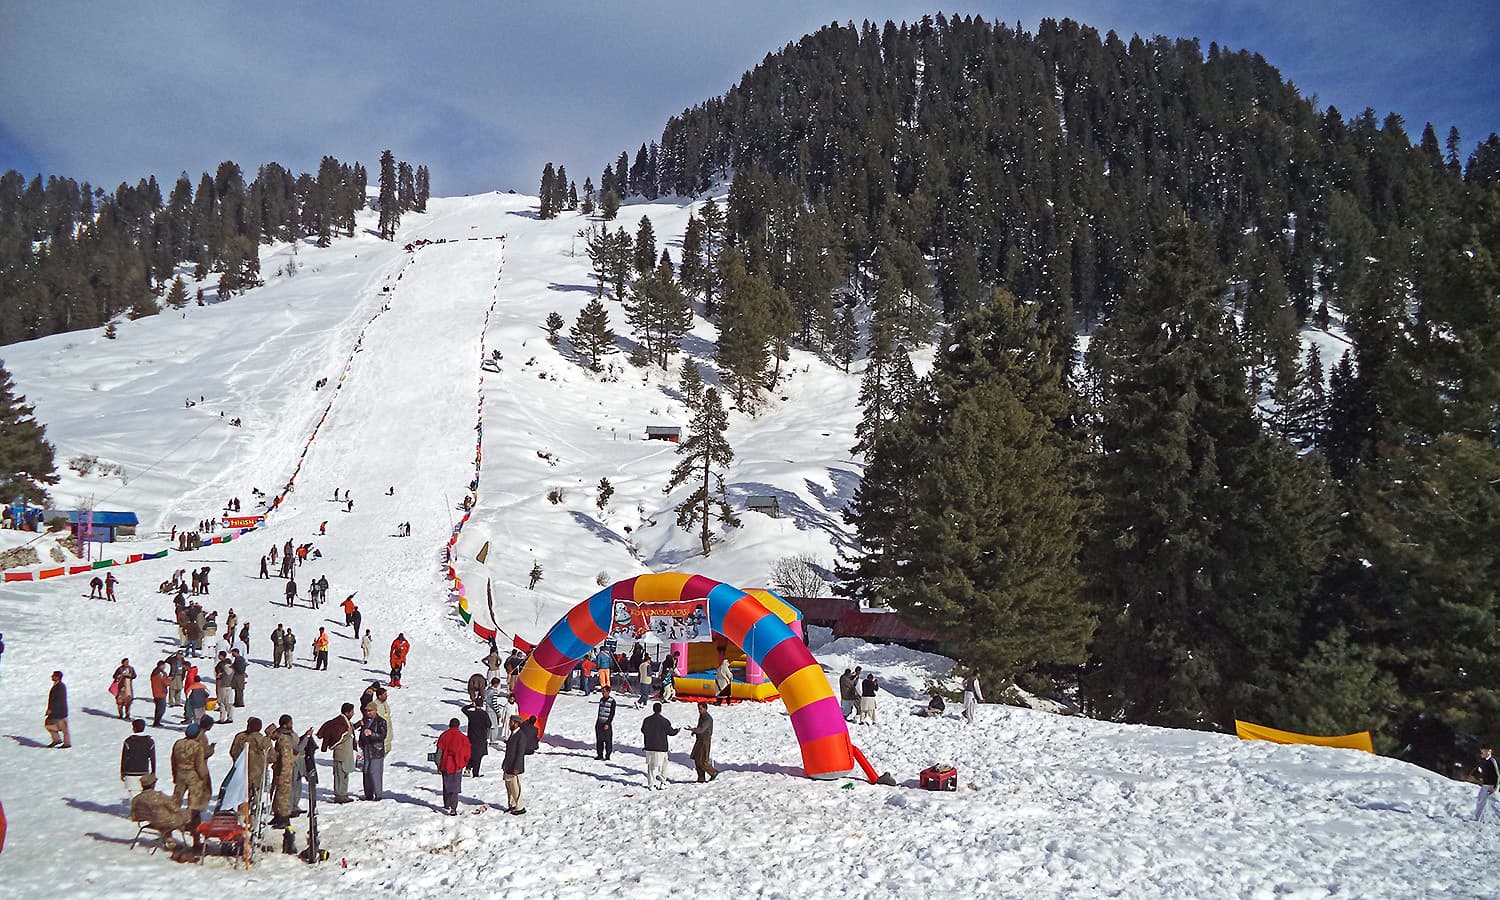 Malam Jabba skiing track in winter tourism